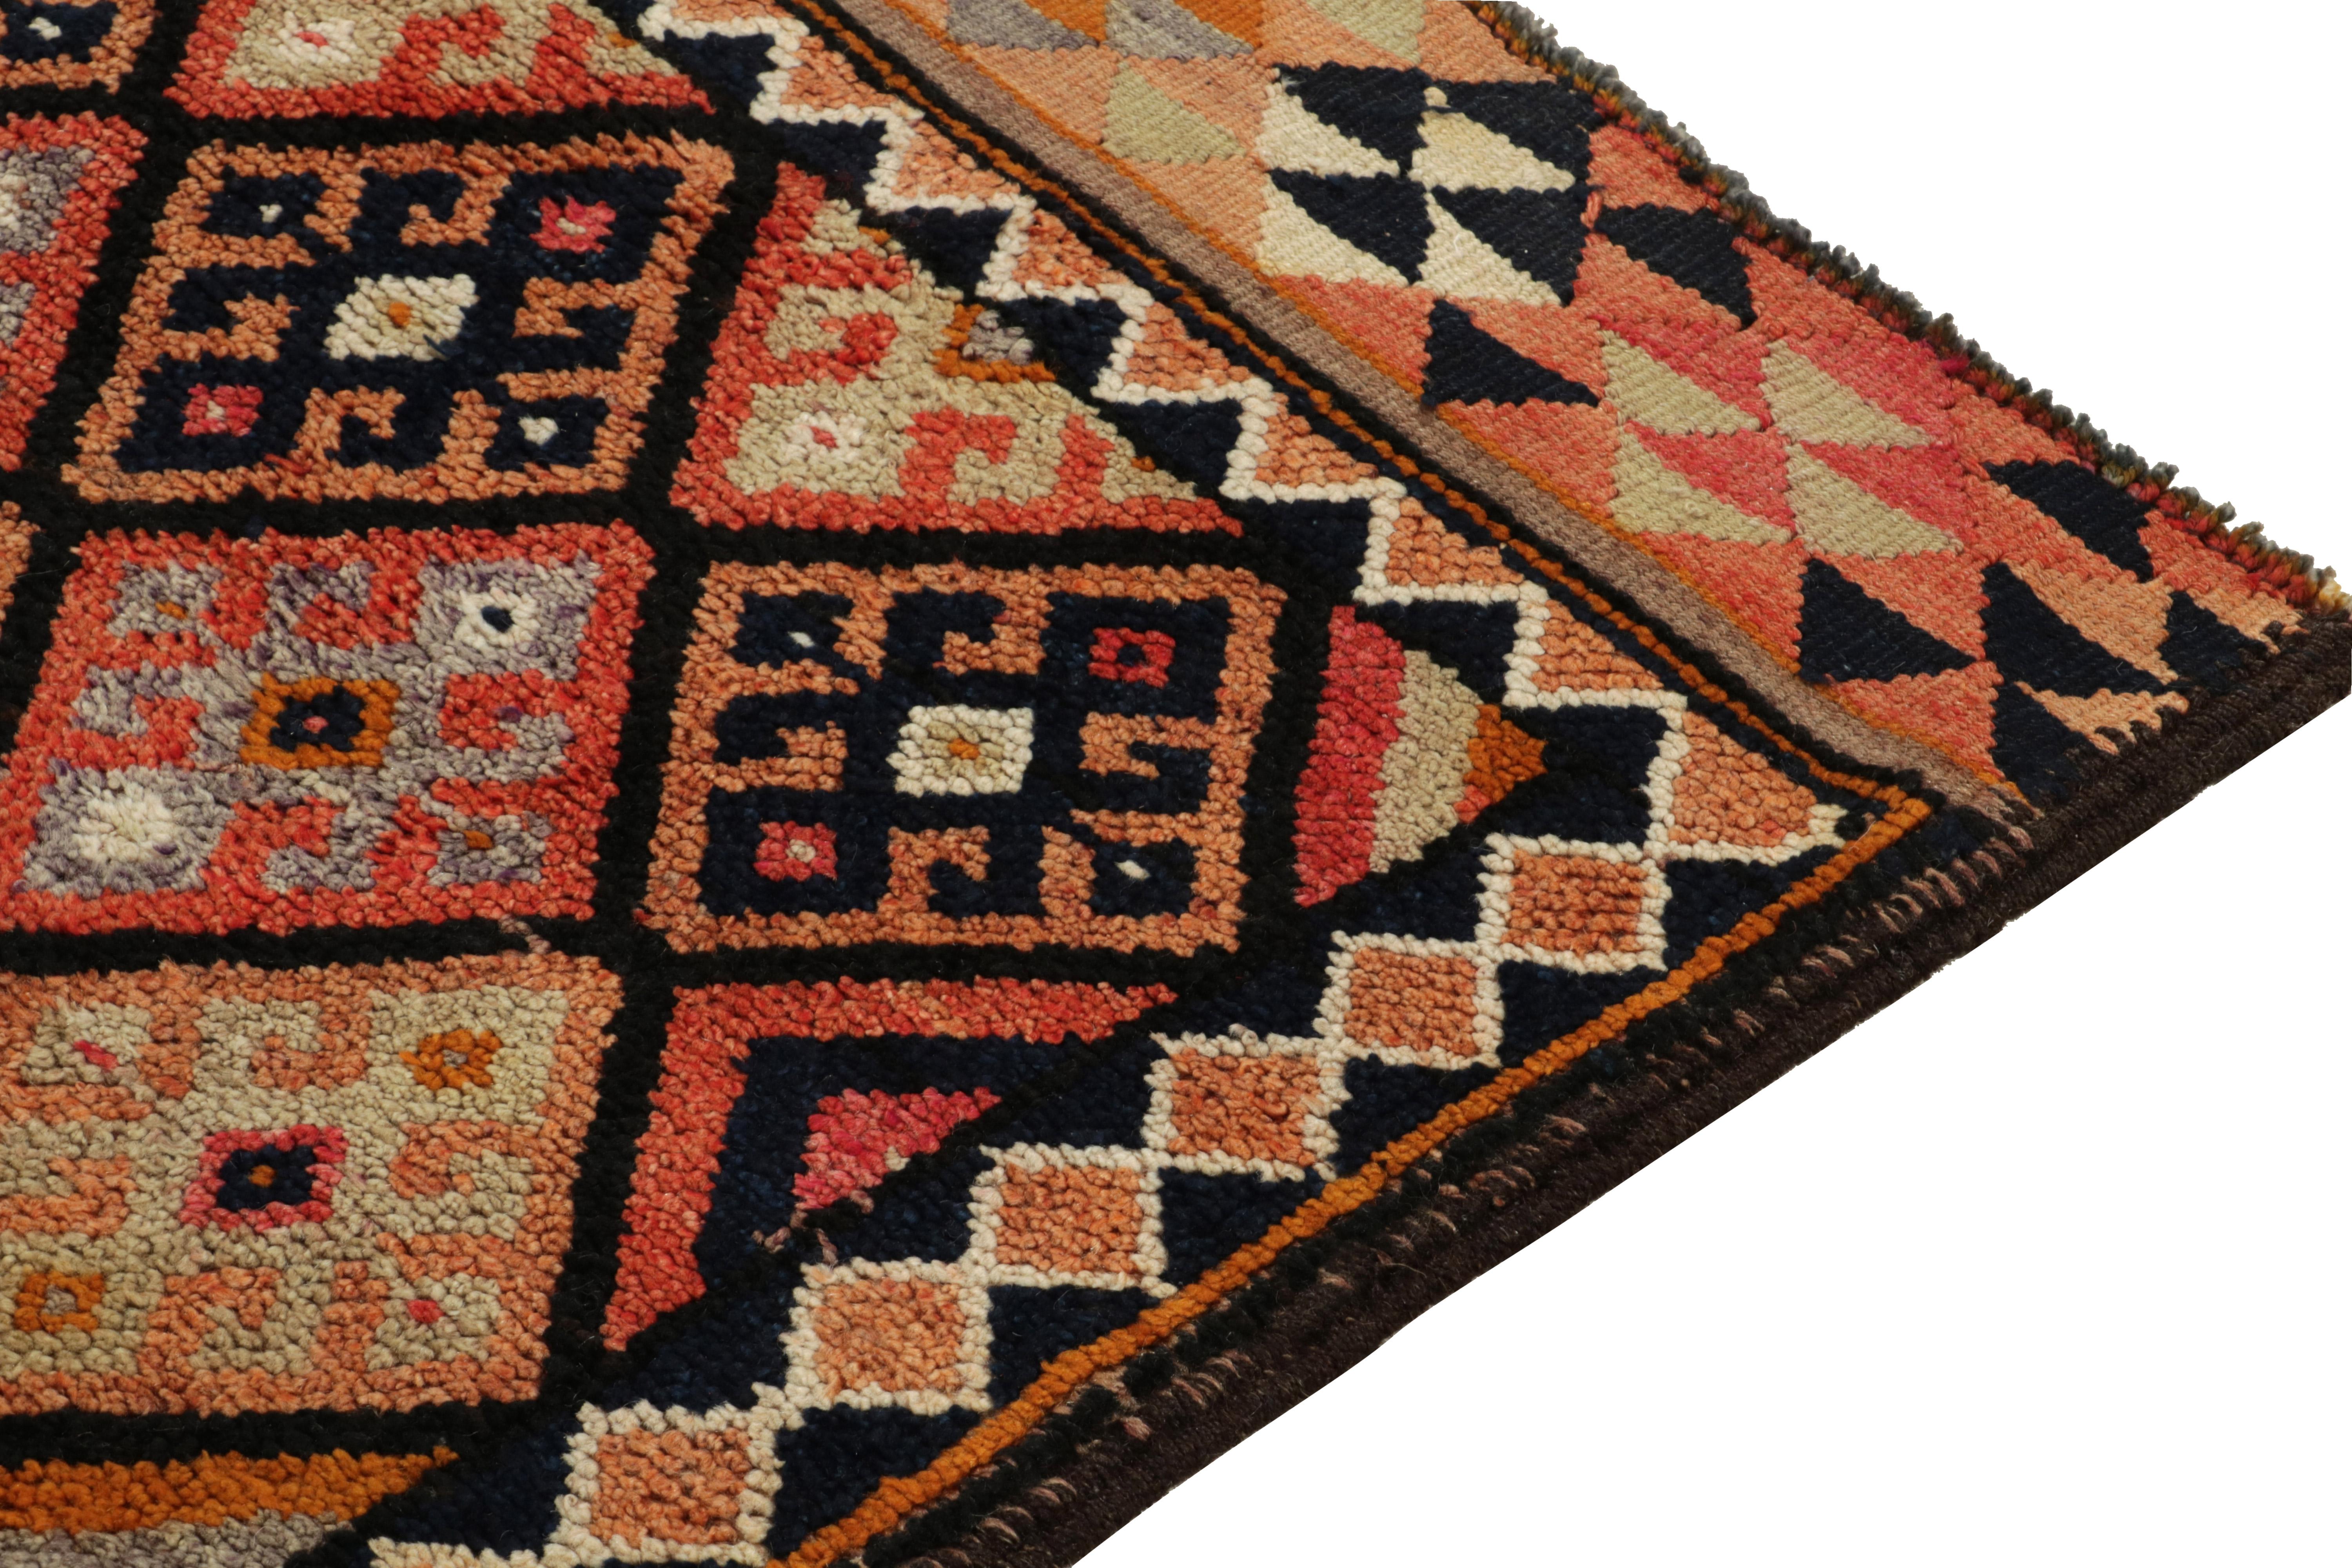 1950s Vintage Tribal Runner in Orange, Red, Geometric Patterns by Rug & Kilim In Good Condition For Sale In Long Island City, NY